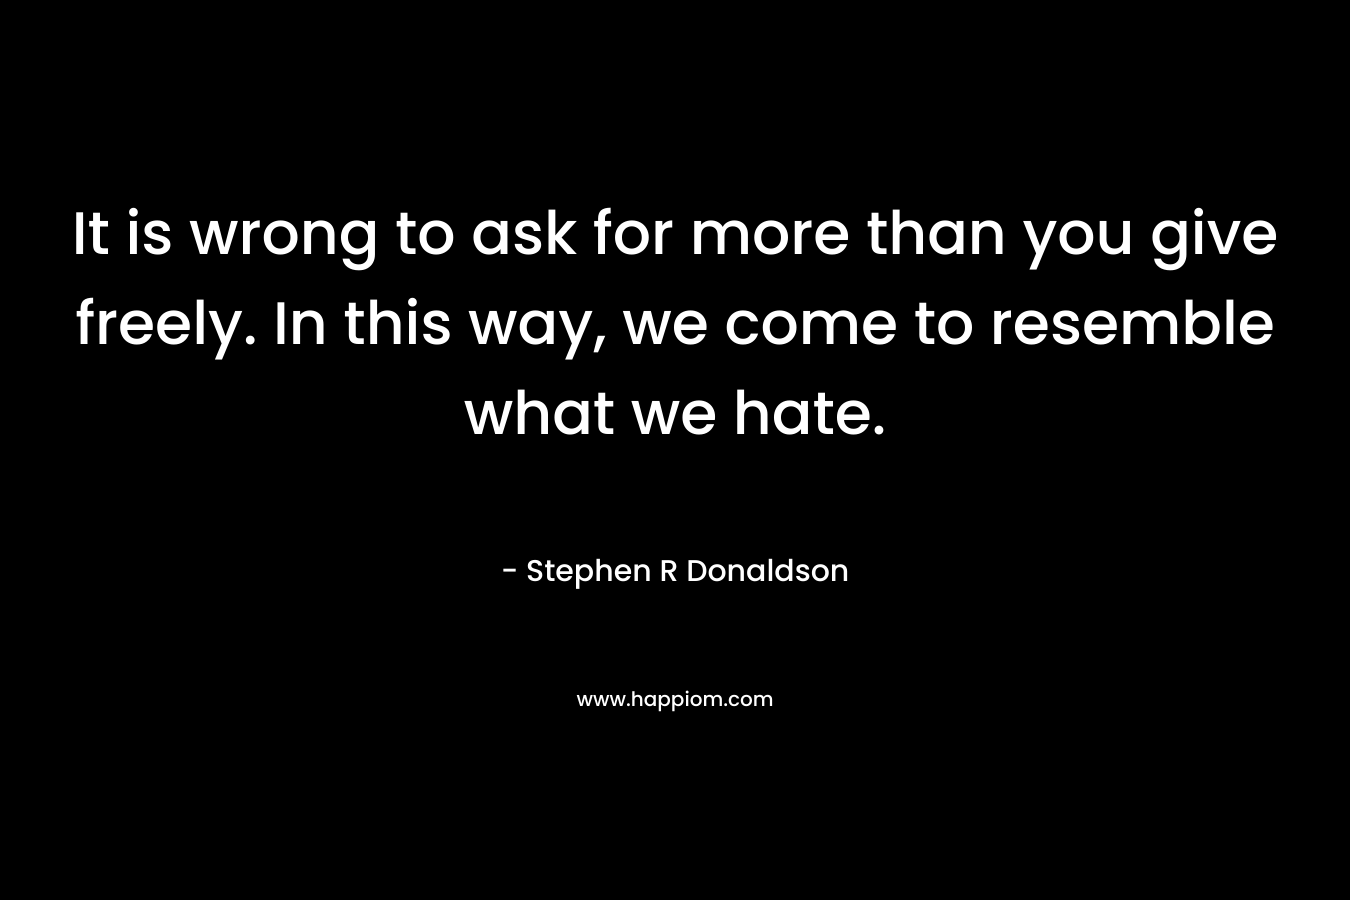 It is wrong to ask for more than you give freely. In this way, we come to resemble what we hate. – Stephen R Donaldson